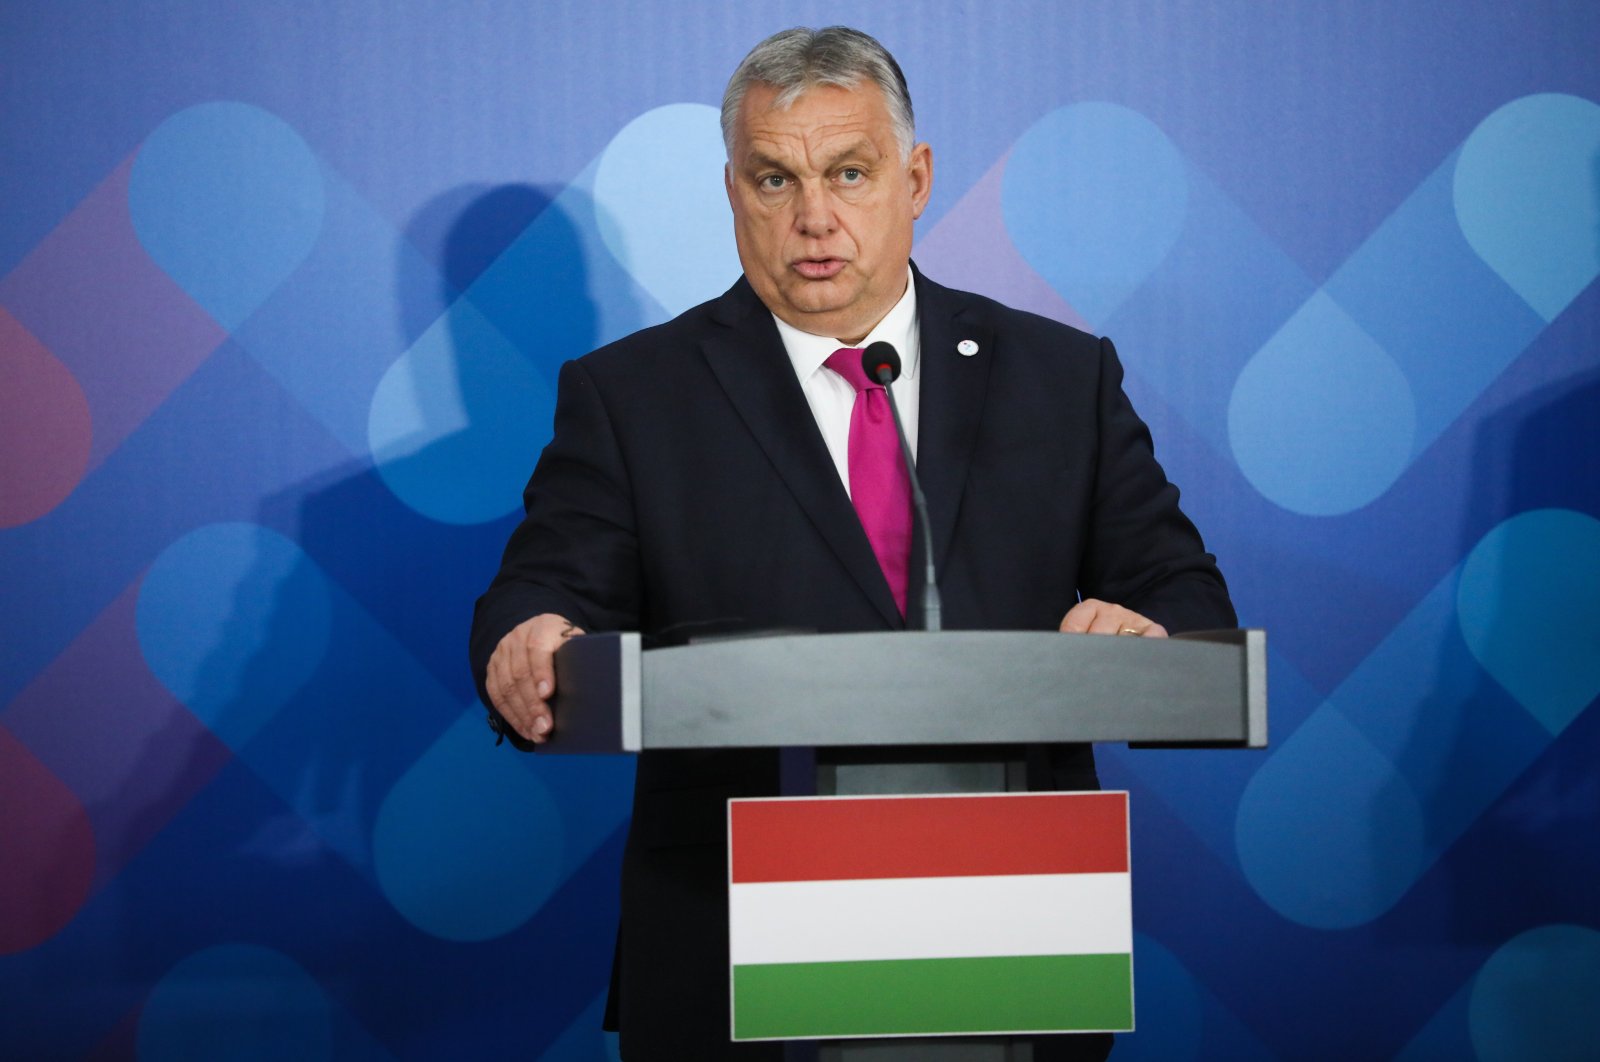 Hungarian Prime Minister Viktor Orban during a press conference after the Visegrad Group (V4) summit in Kosice, Slovakia, Nov. 24, 2022. (EPA Photo)